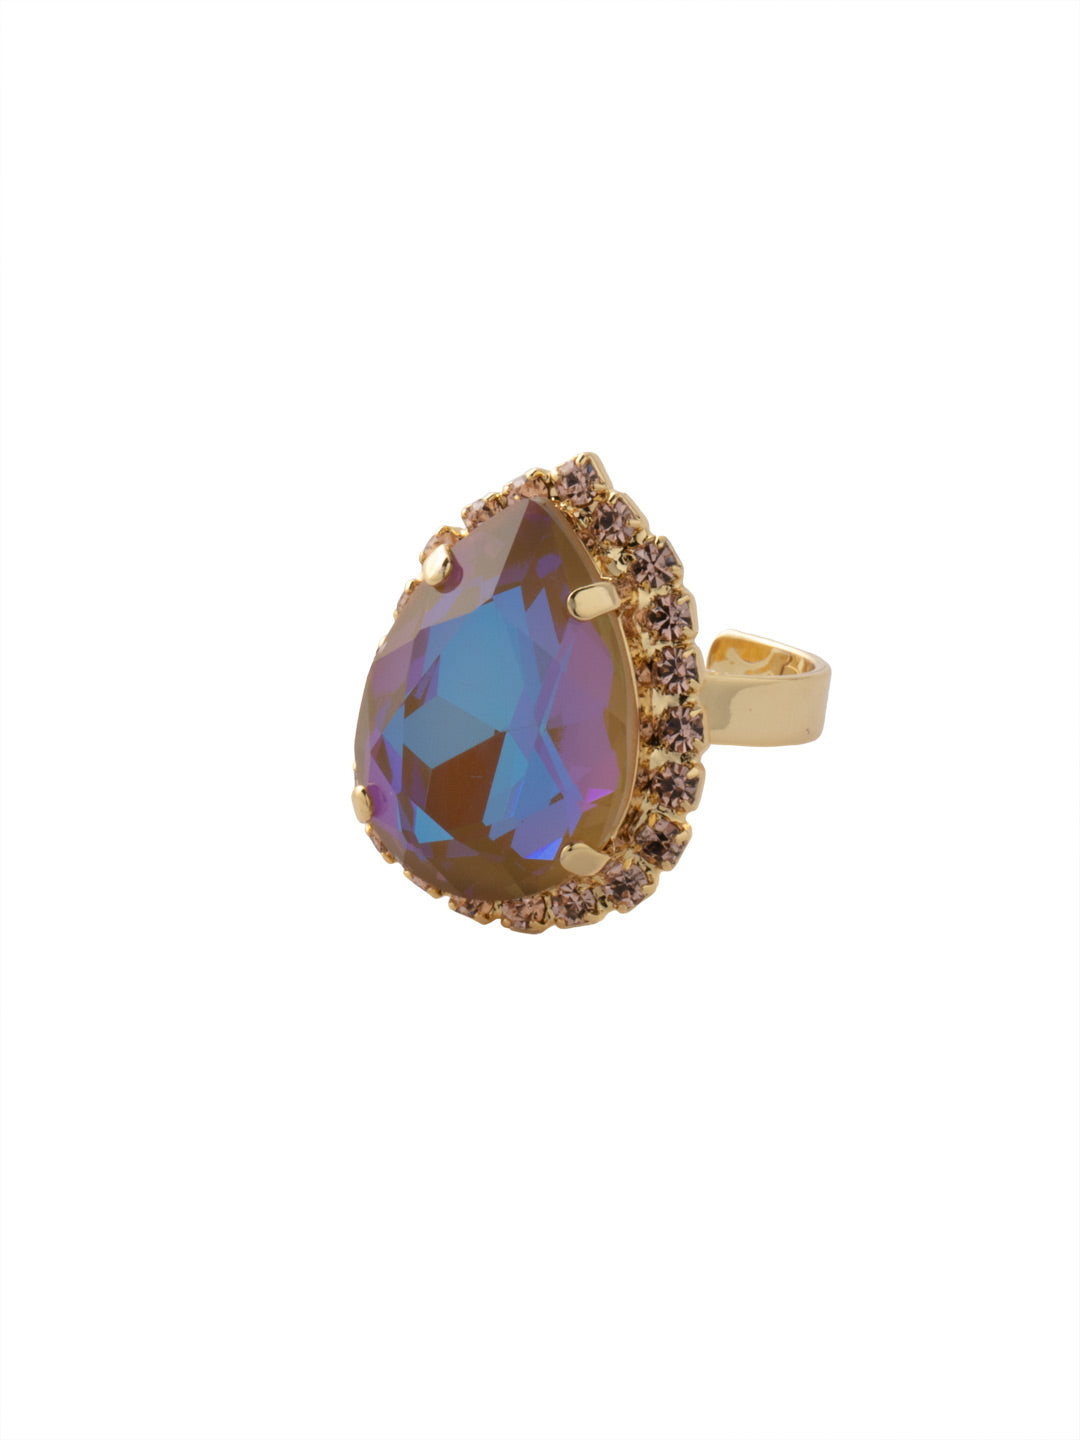 Giselle Pear Cocktail Ring - RFC80BGRSU - <p>The Giselle Pear Cocktail Ring features a halo pear cut crystal on an adjustable band. From Sorrelli's Raw Sugar collection in our Bright Gold-tone finish.</p>